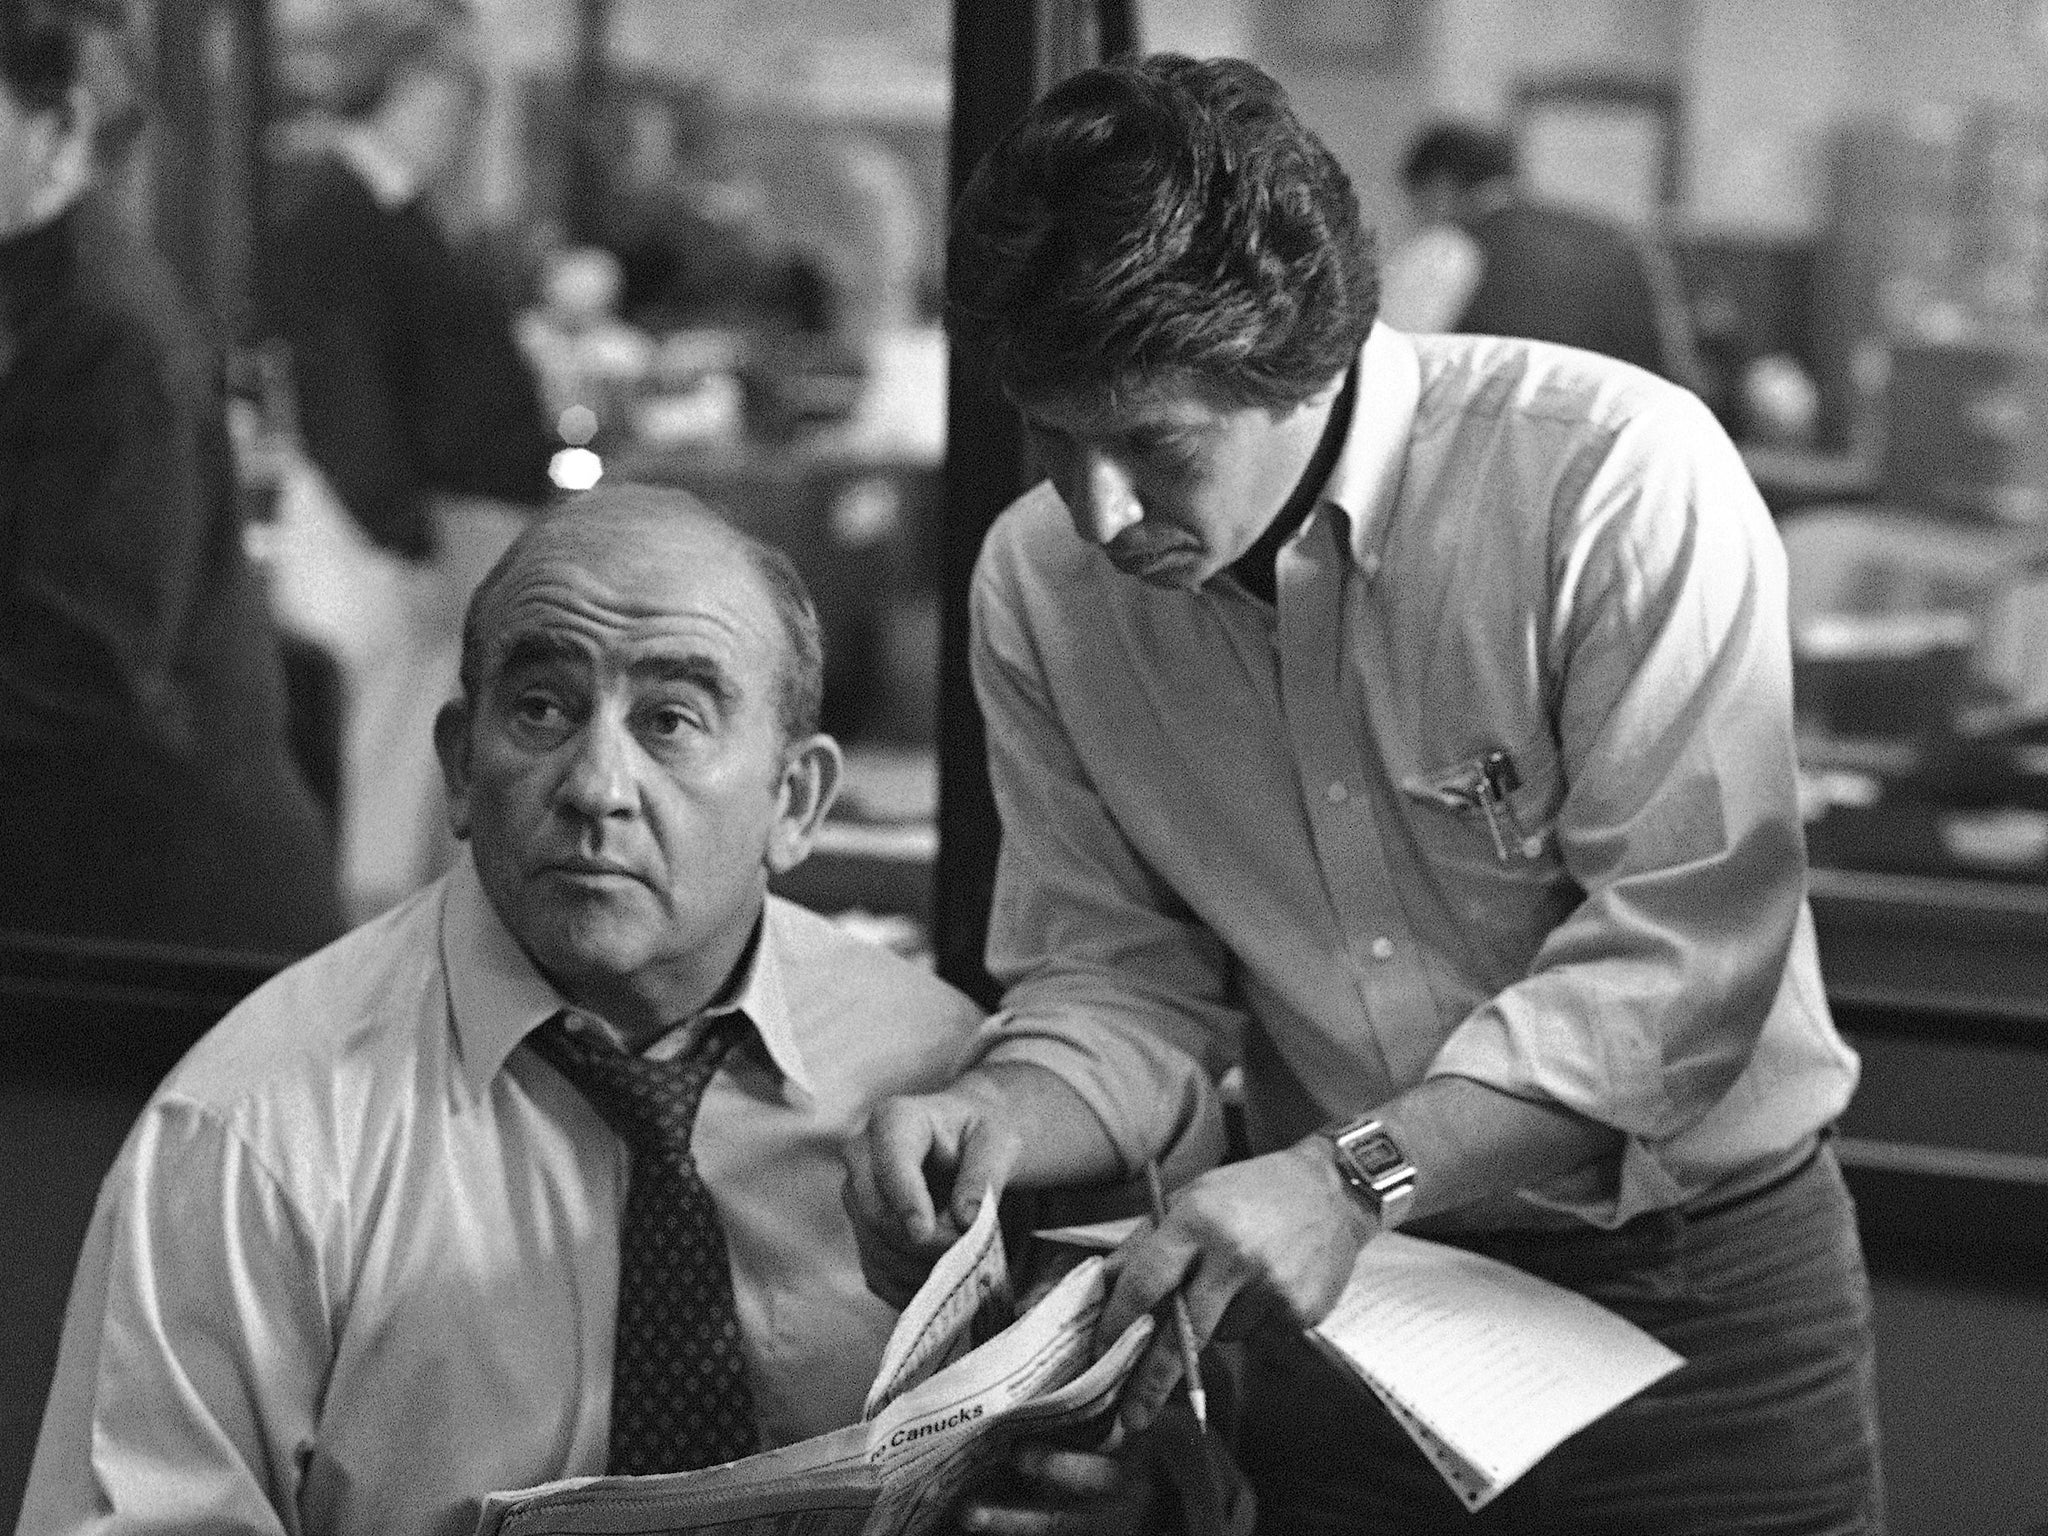 Asner on the set of Lou Grant in 1980